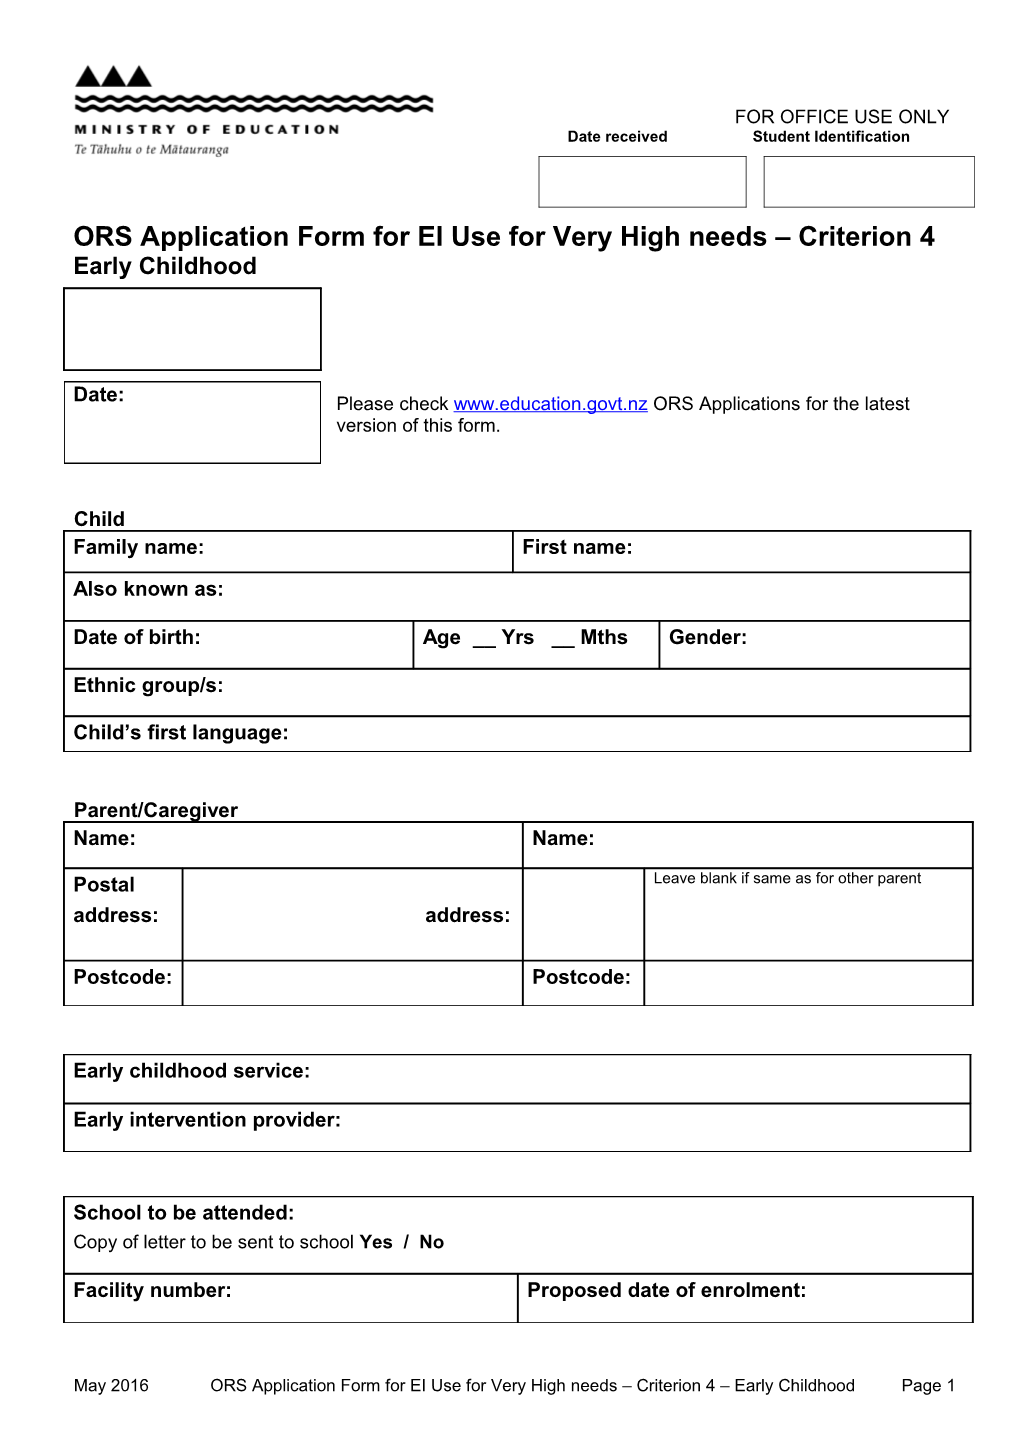 ORS Application Form for EI Use Criterion 4 Very High Needs